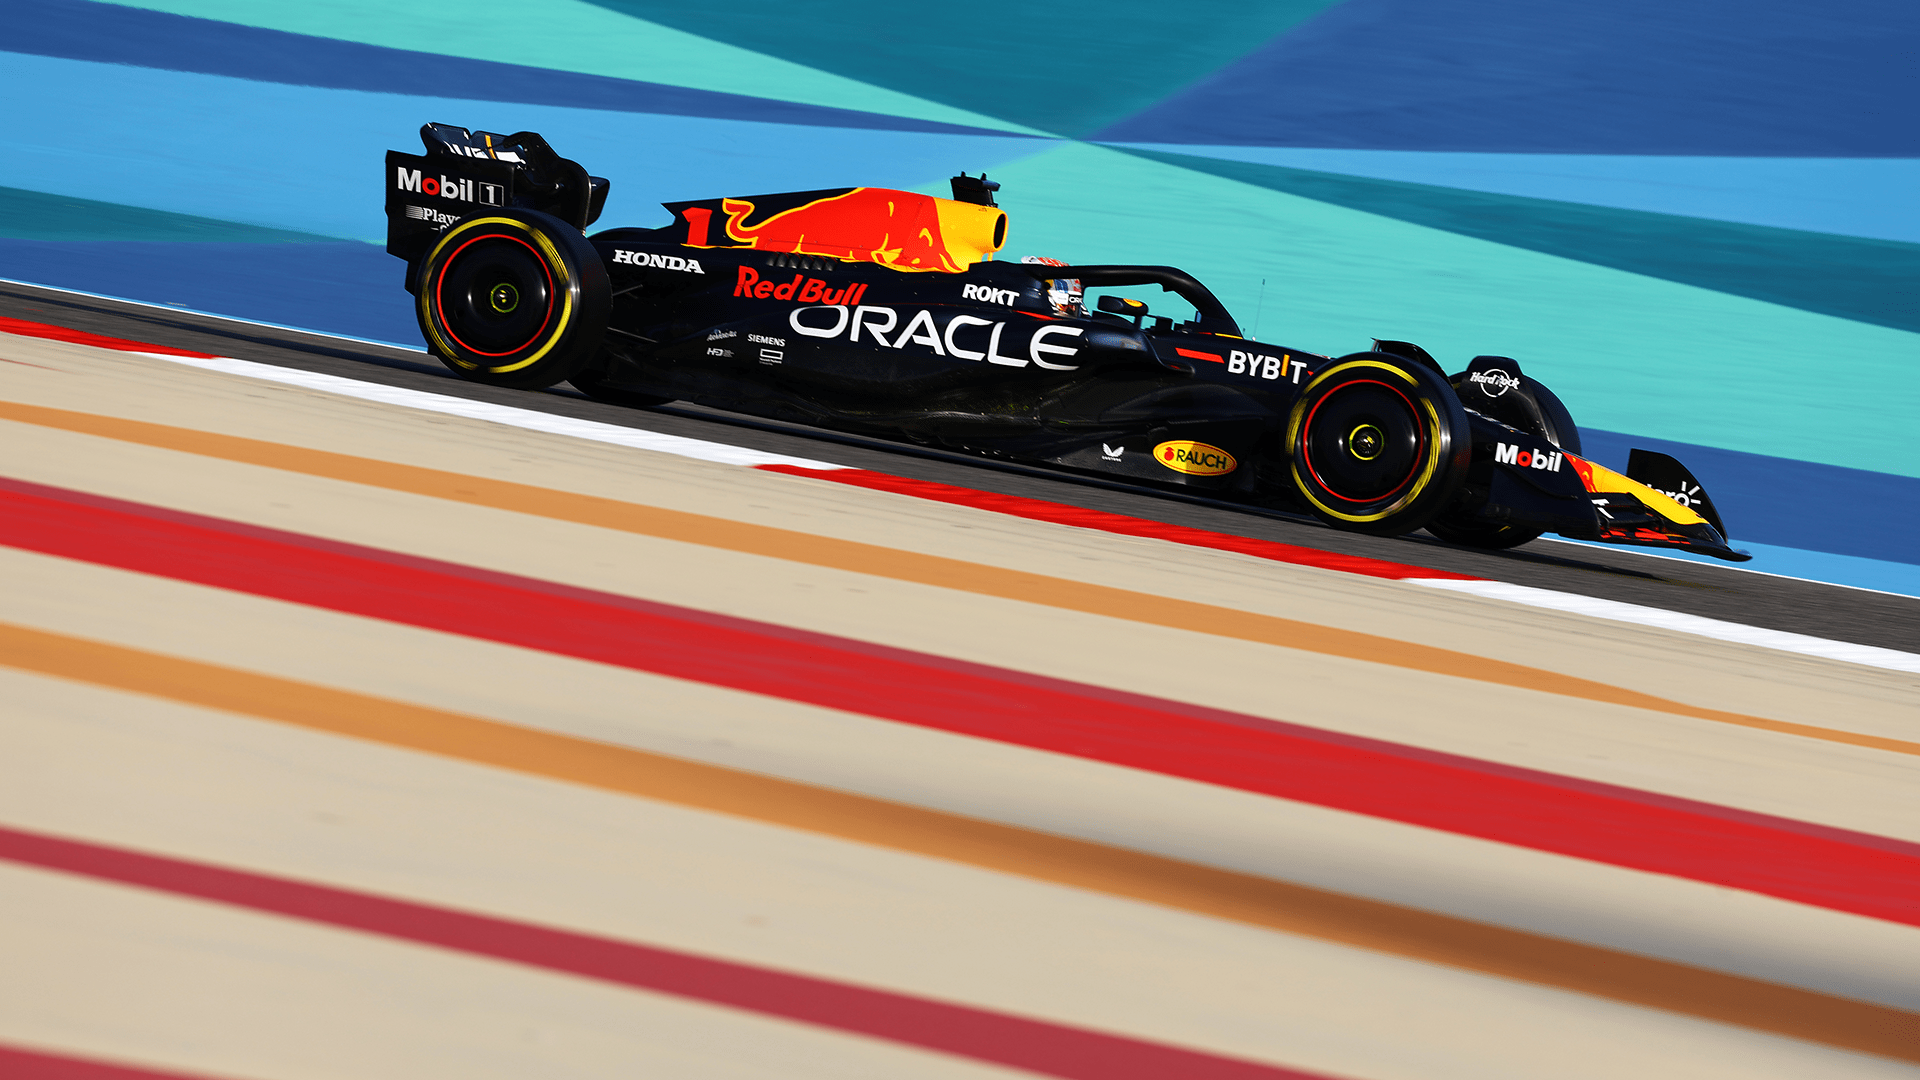 2023 testing Day 1 report and highlights: Verstappen edges out as F1 2023 kicks off with first day of pre-season testing Bahrain | Formula 1®